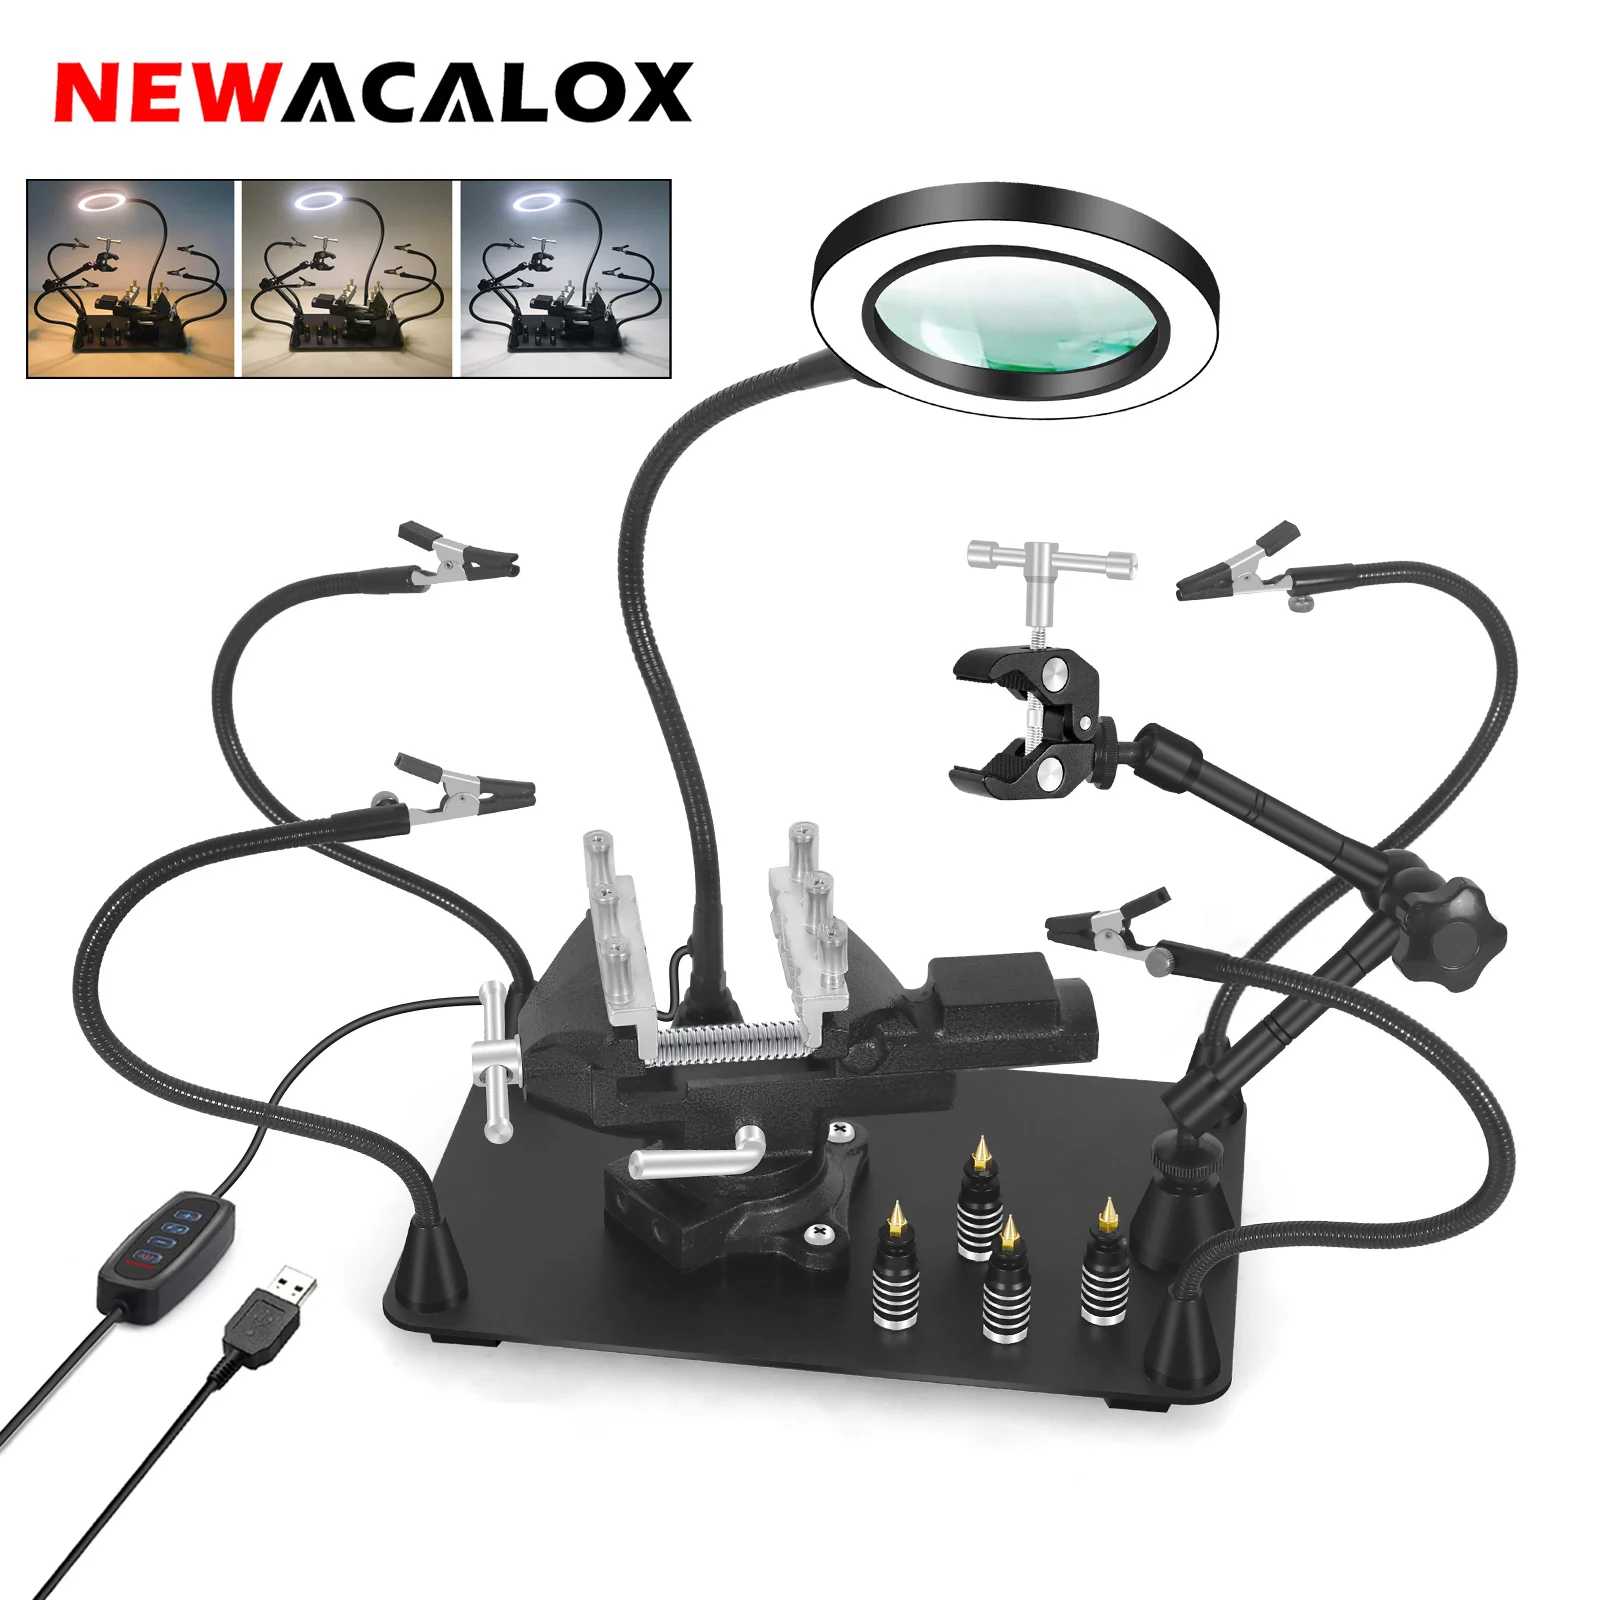 NEWACALOX Magnetic Helping Hands Soldering Third Hand PCB Circuit Board Holder with 5X LED Magnifying Lamp 360 Heat Gun Holder